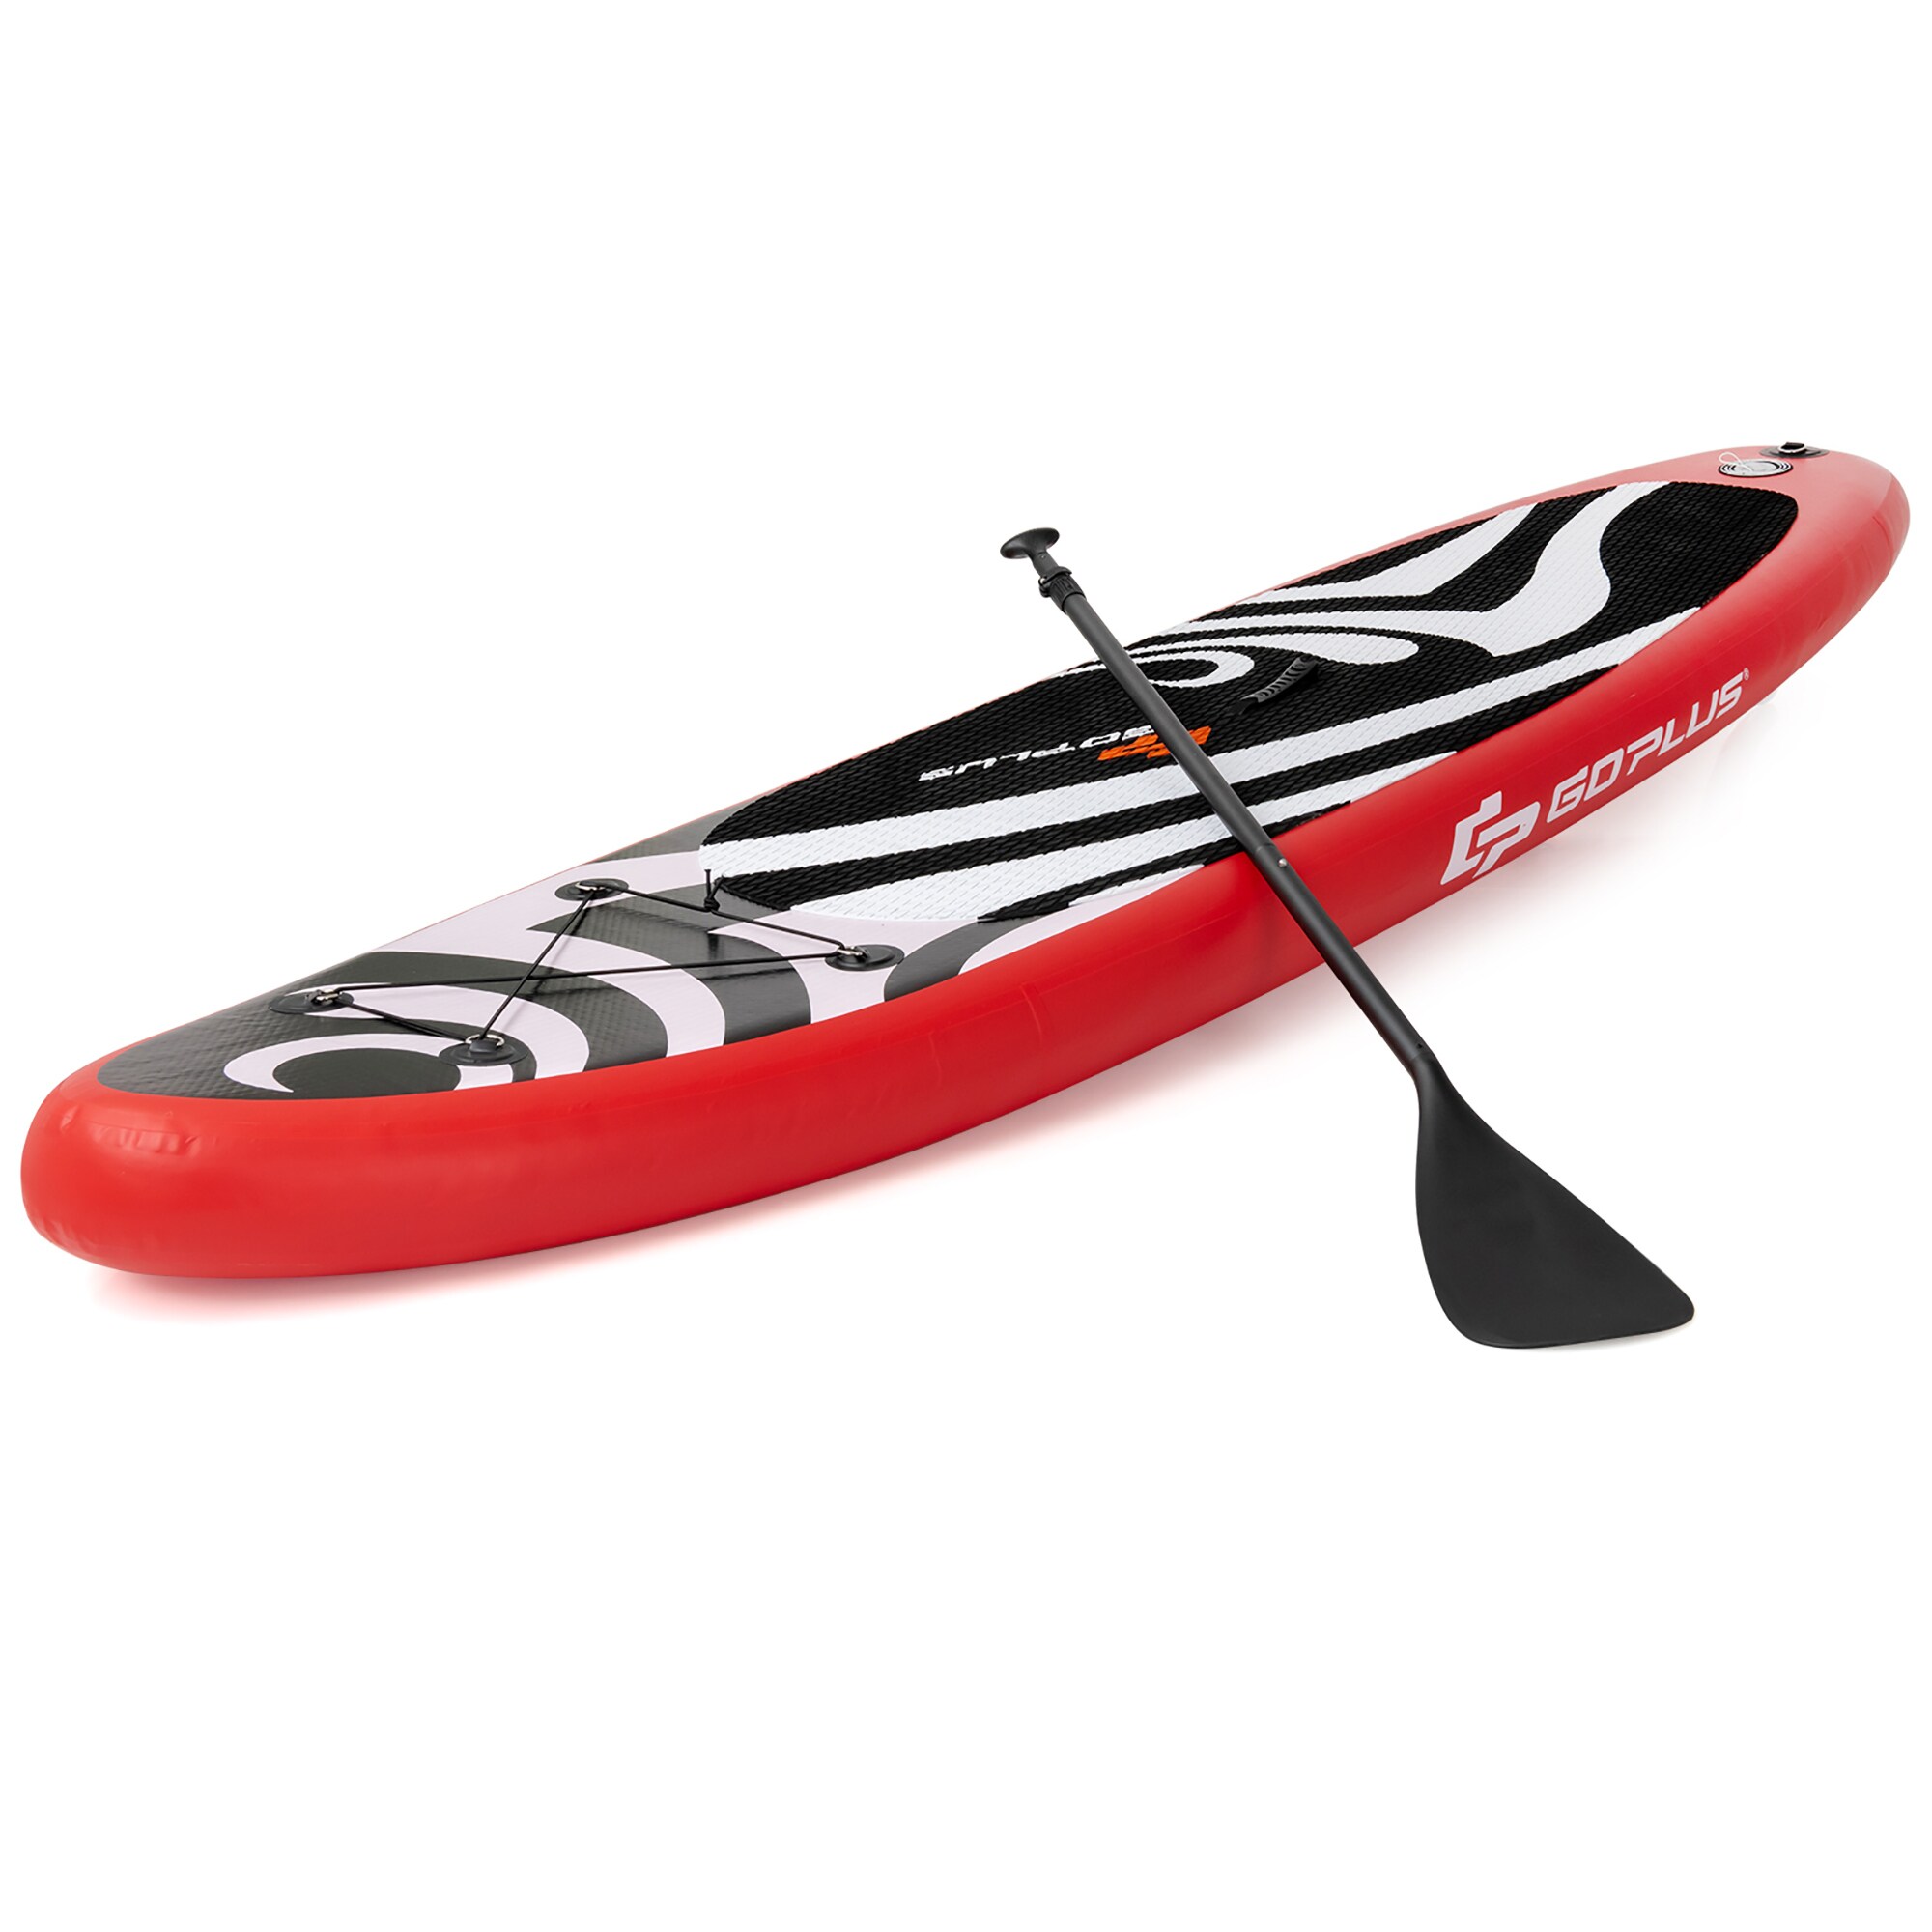 10' Inflatable SUP Stand up Paddle Board Surfboard Adjustable Fin Paddle Red 